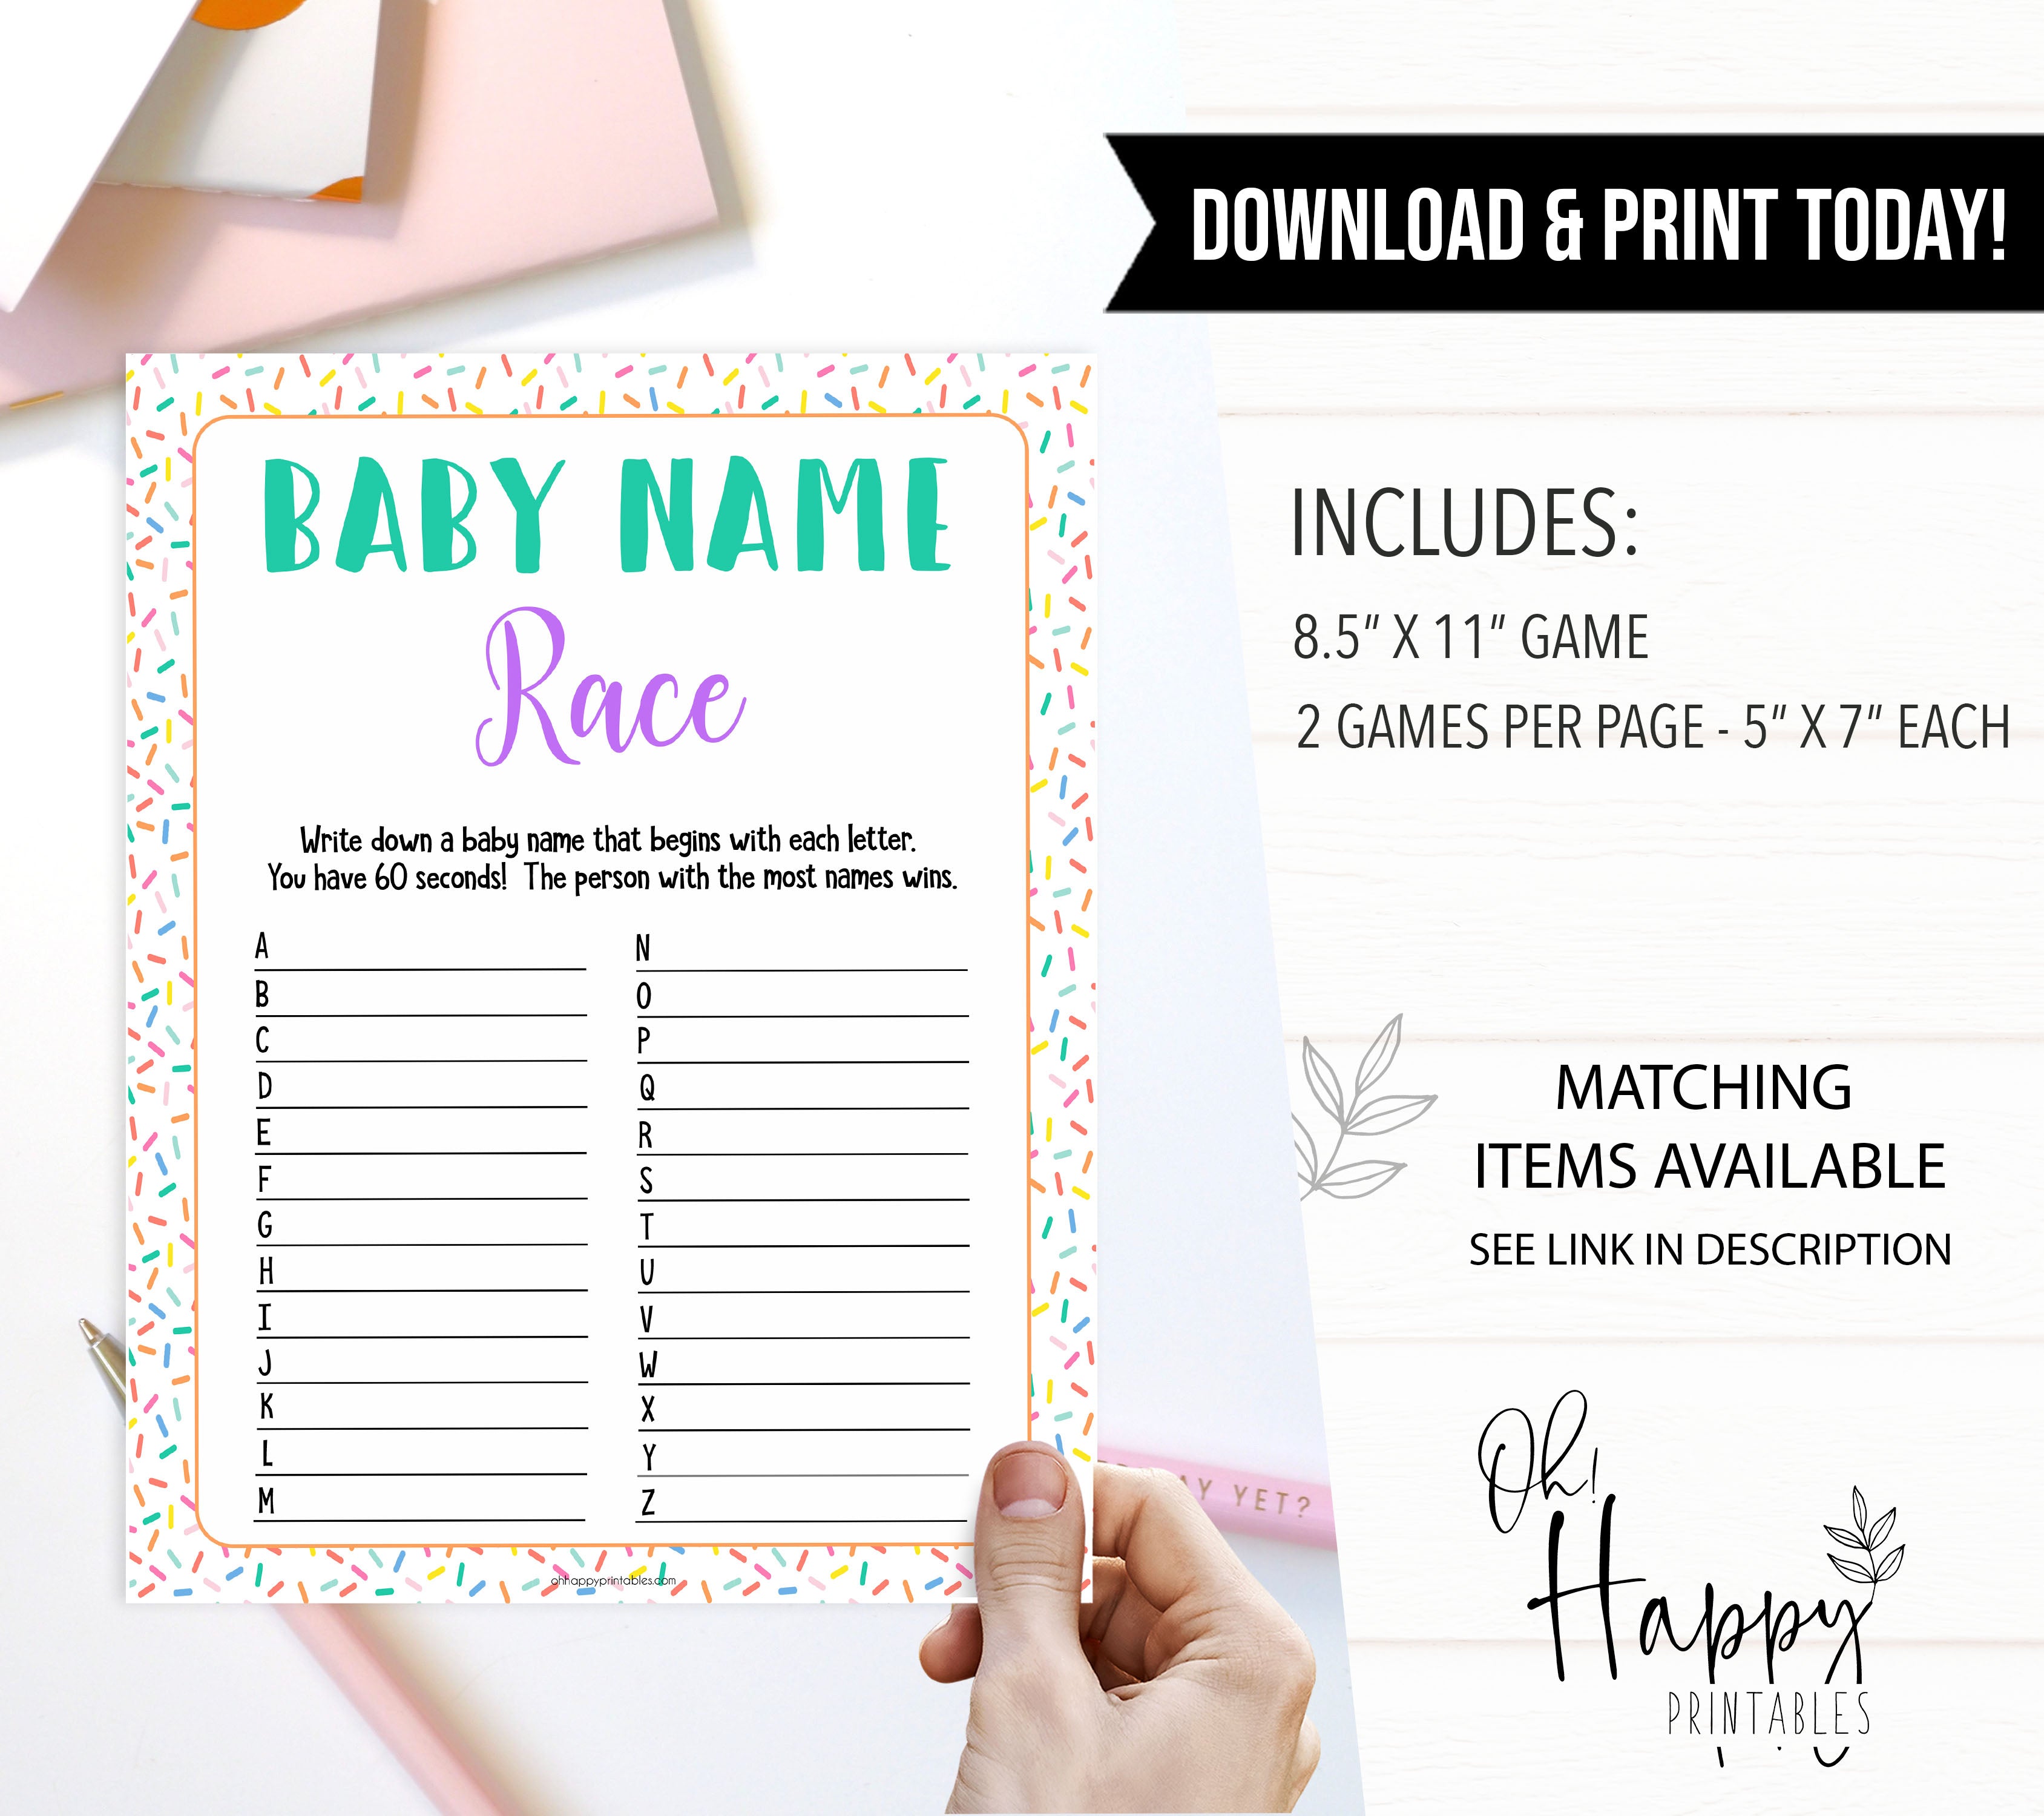 Baby sprinkle games, baby name race game, printable baby games, baby shower games, baby spring theme, popular baby games, fun baby games, baby shower ideas